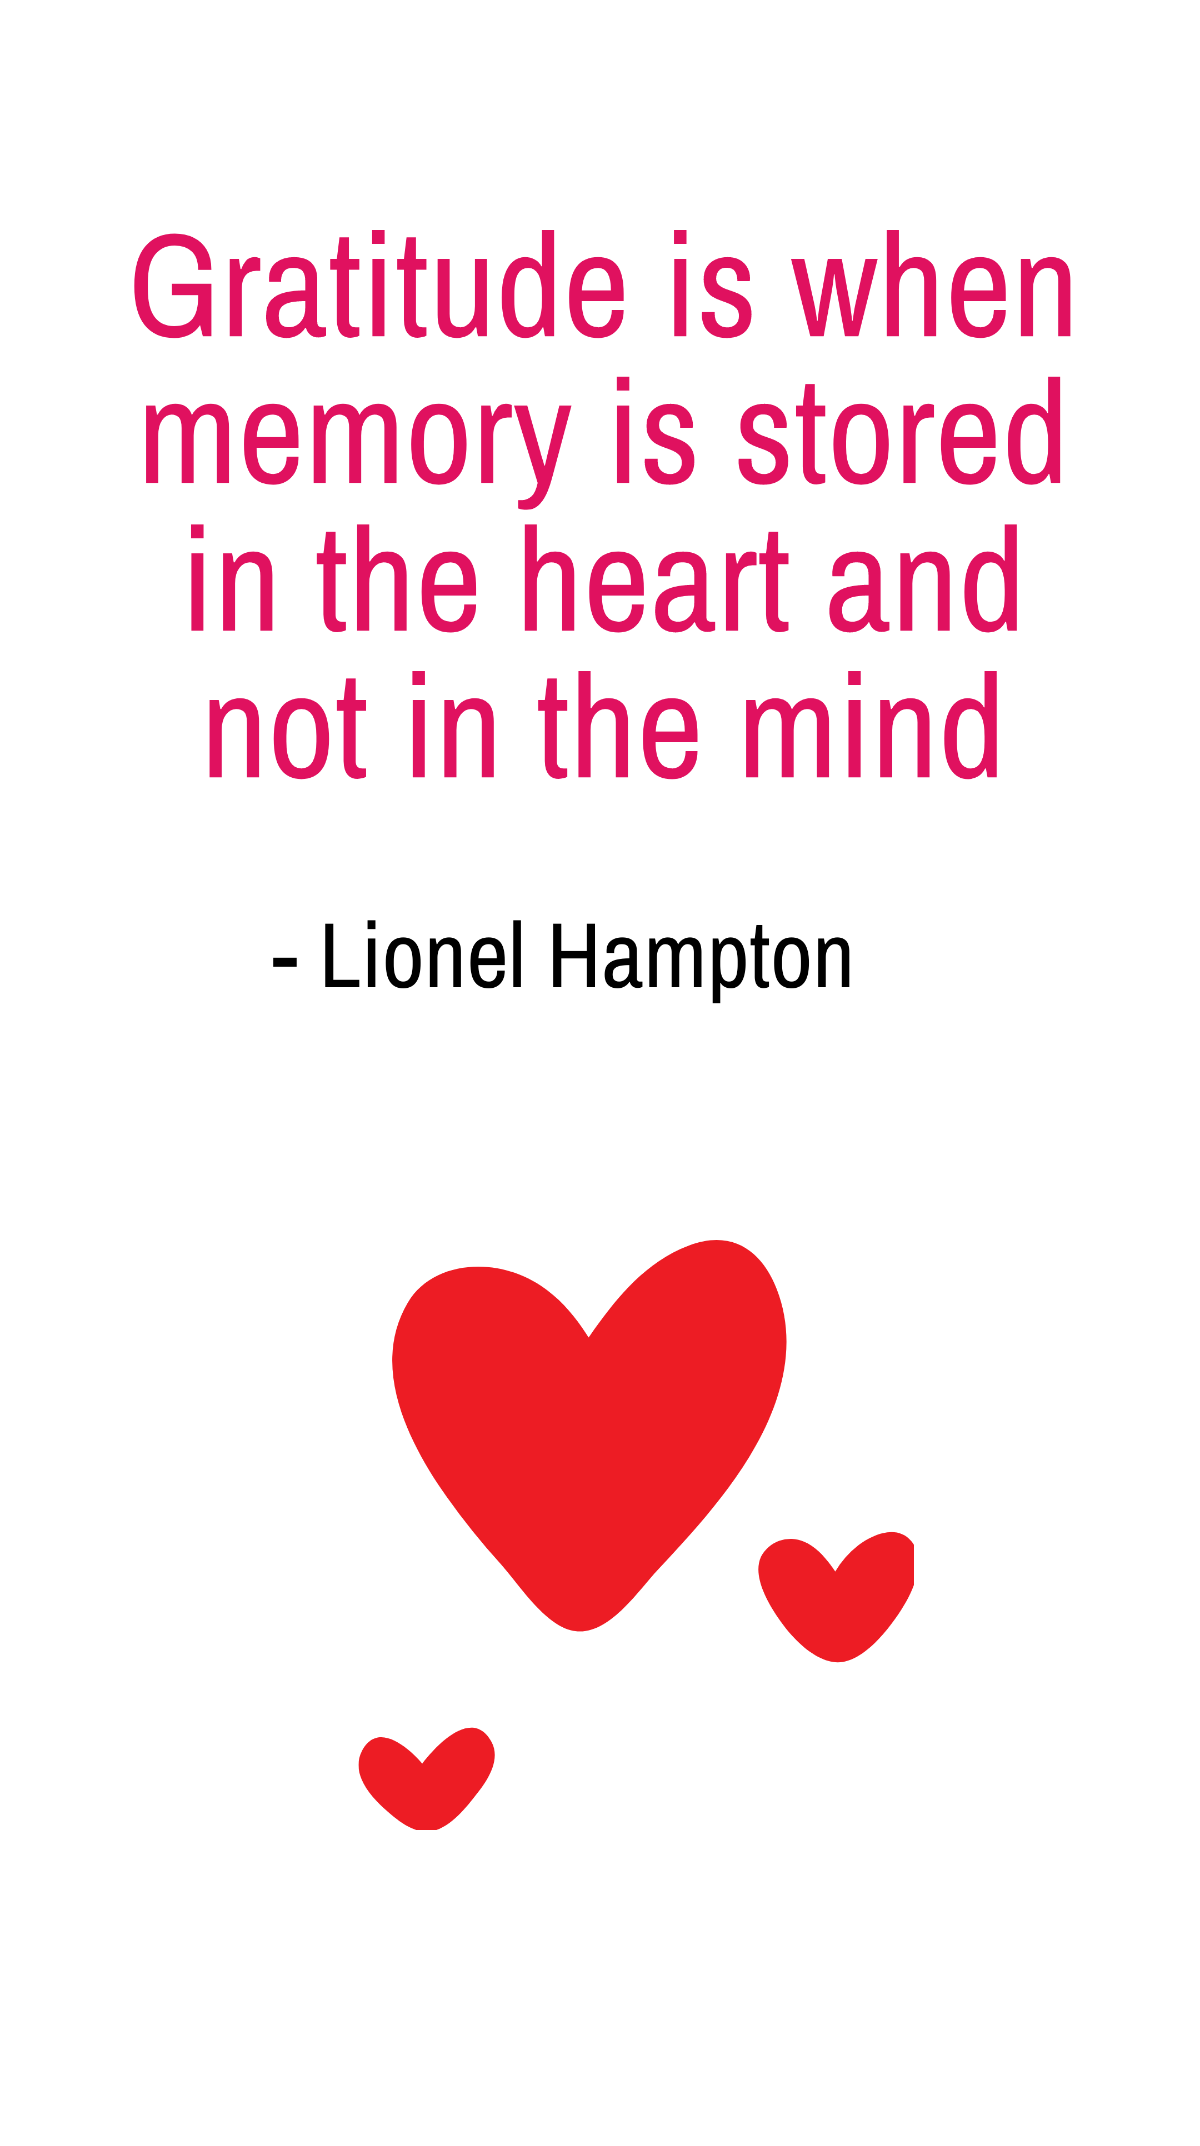 Free Lionel Hampton - Gratitude is when memory is stored in the heart and not in the mind Template